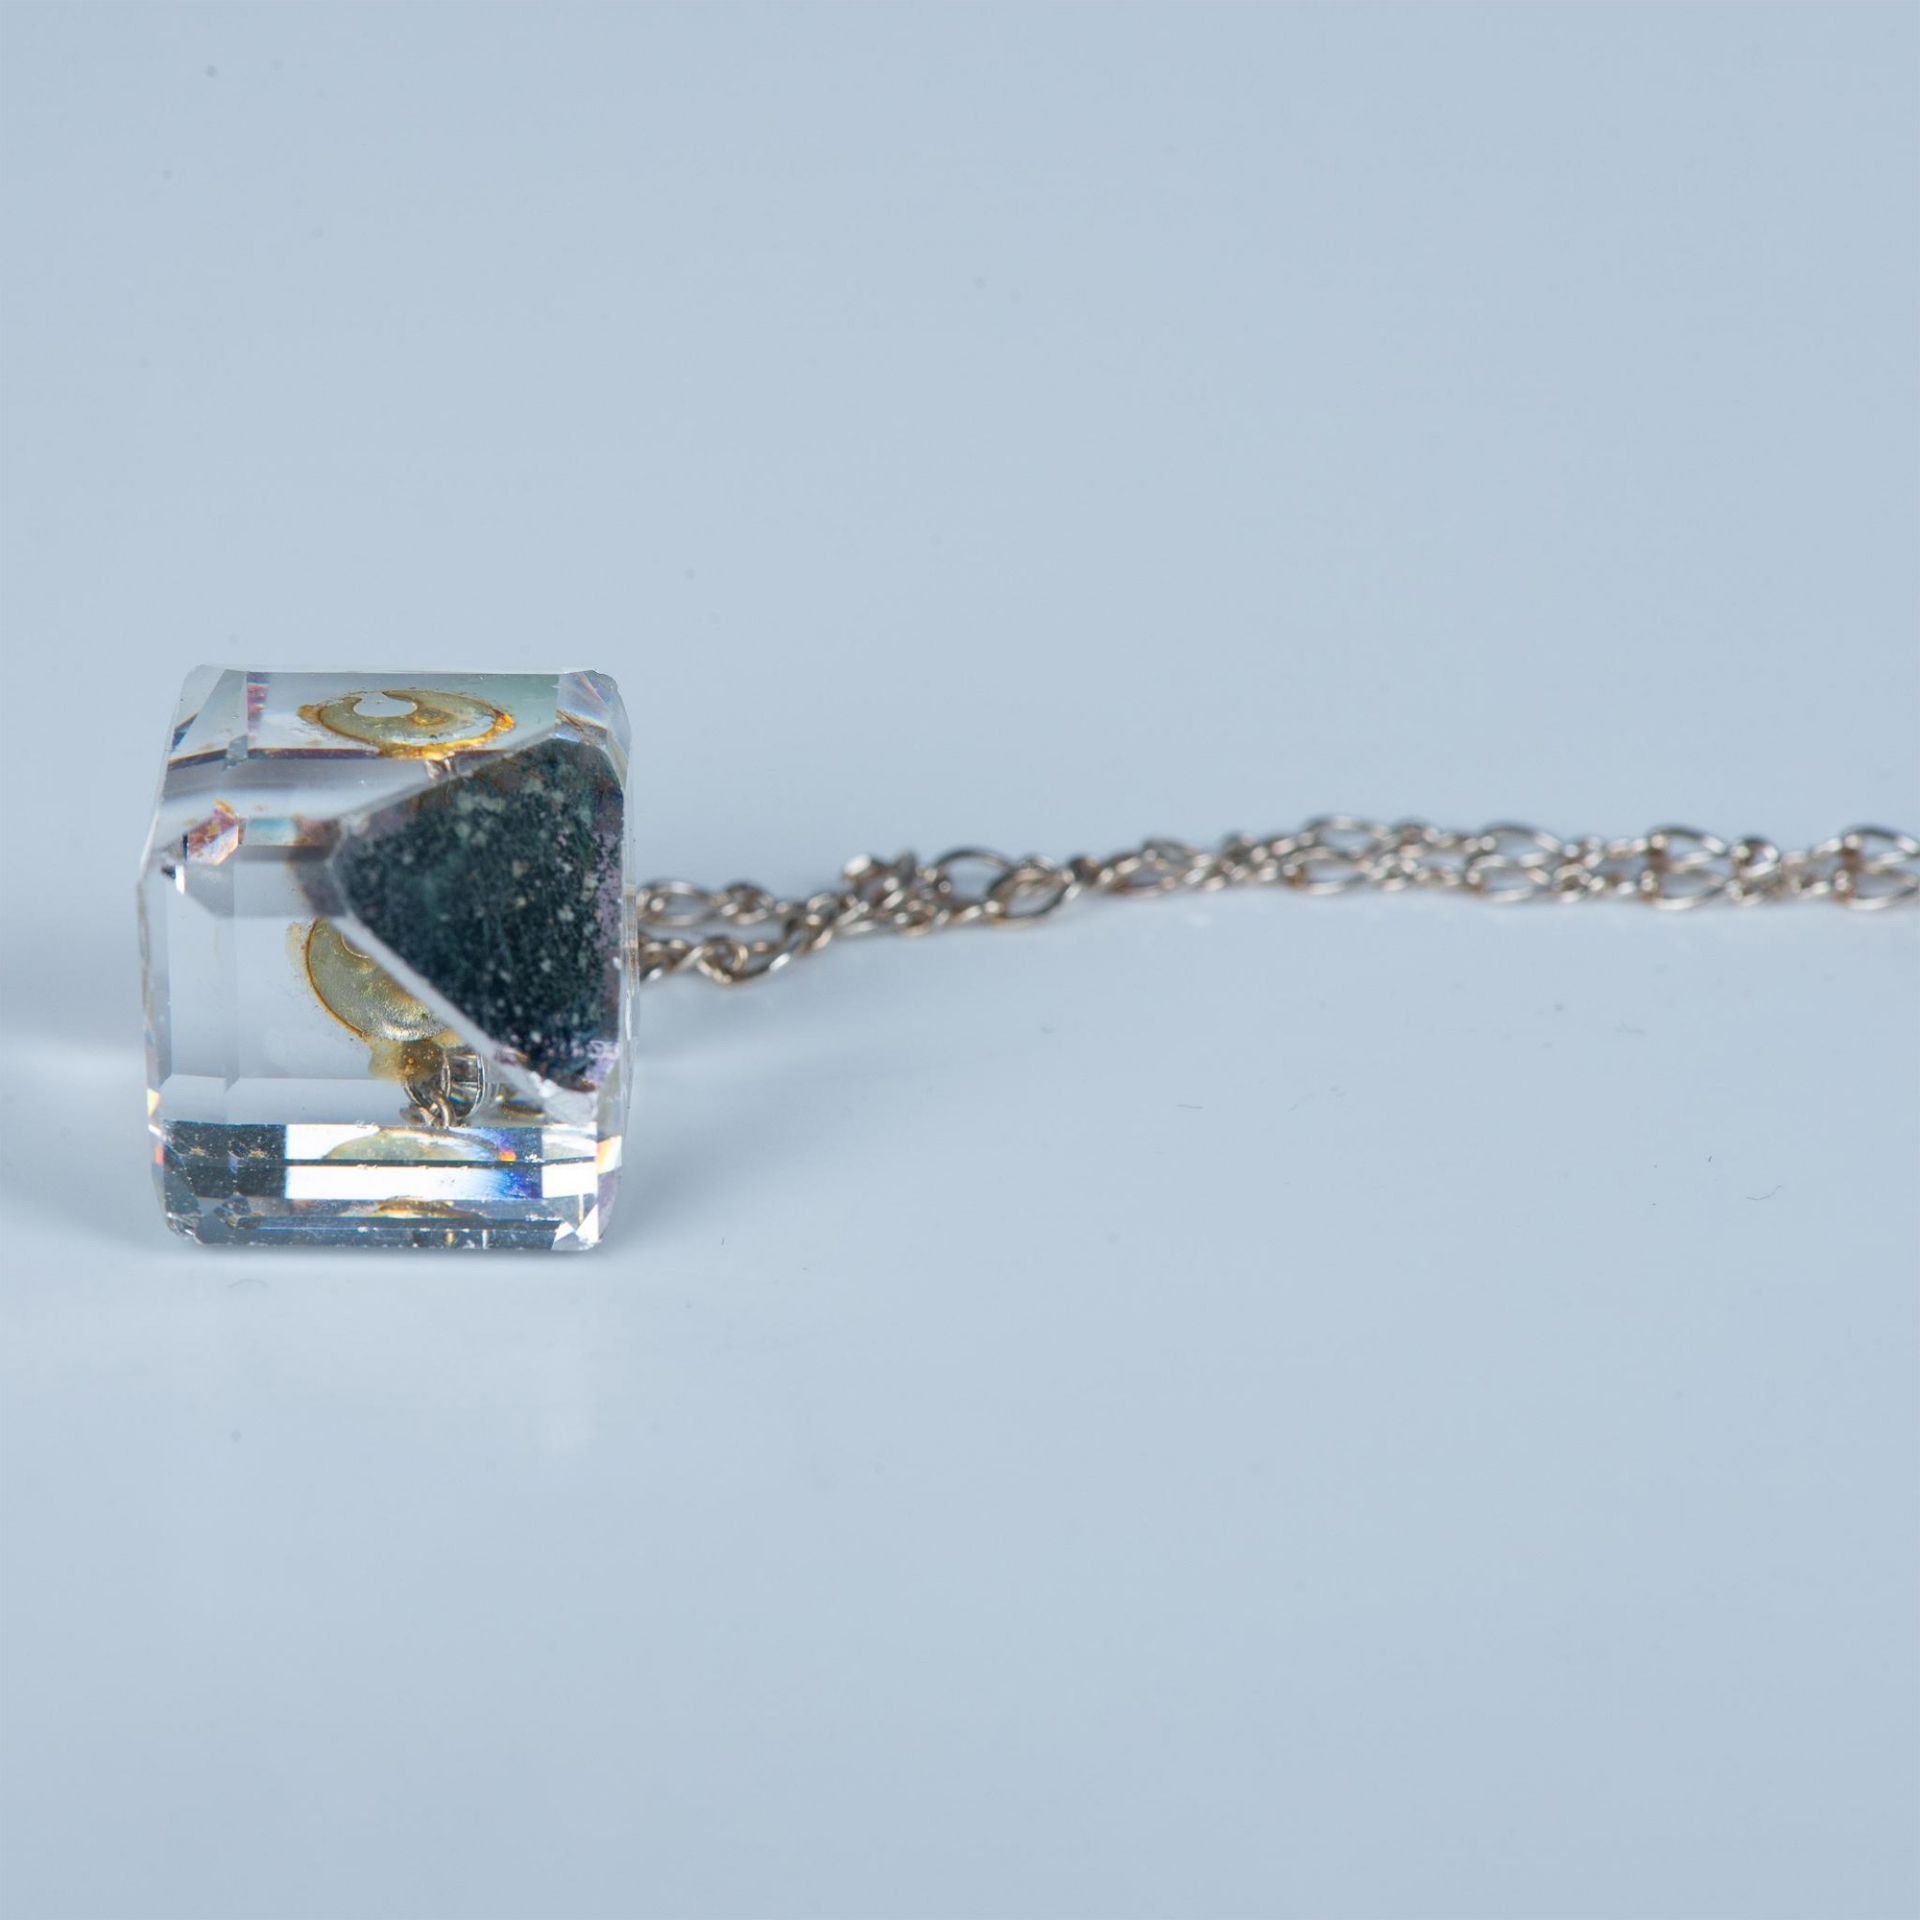 Crystal Pendant on Sterling Silver Chain - Image 3 of 4